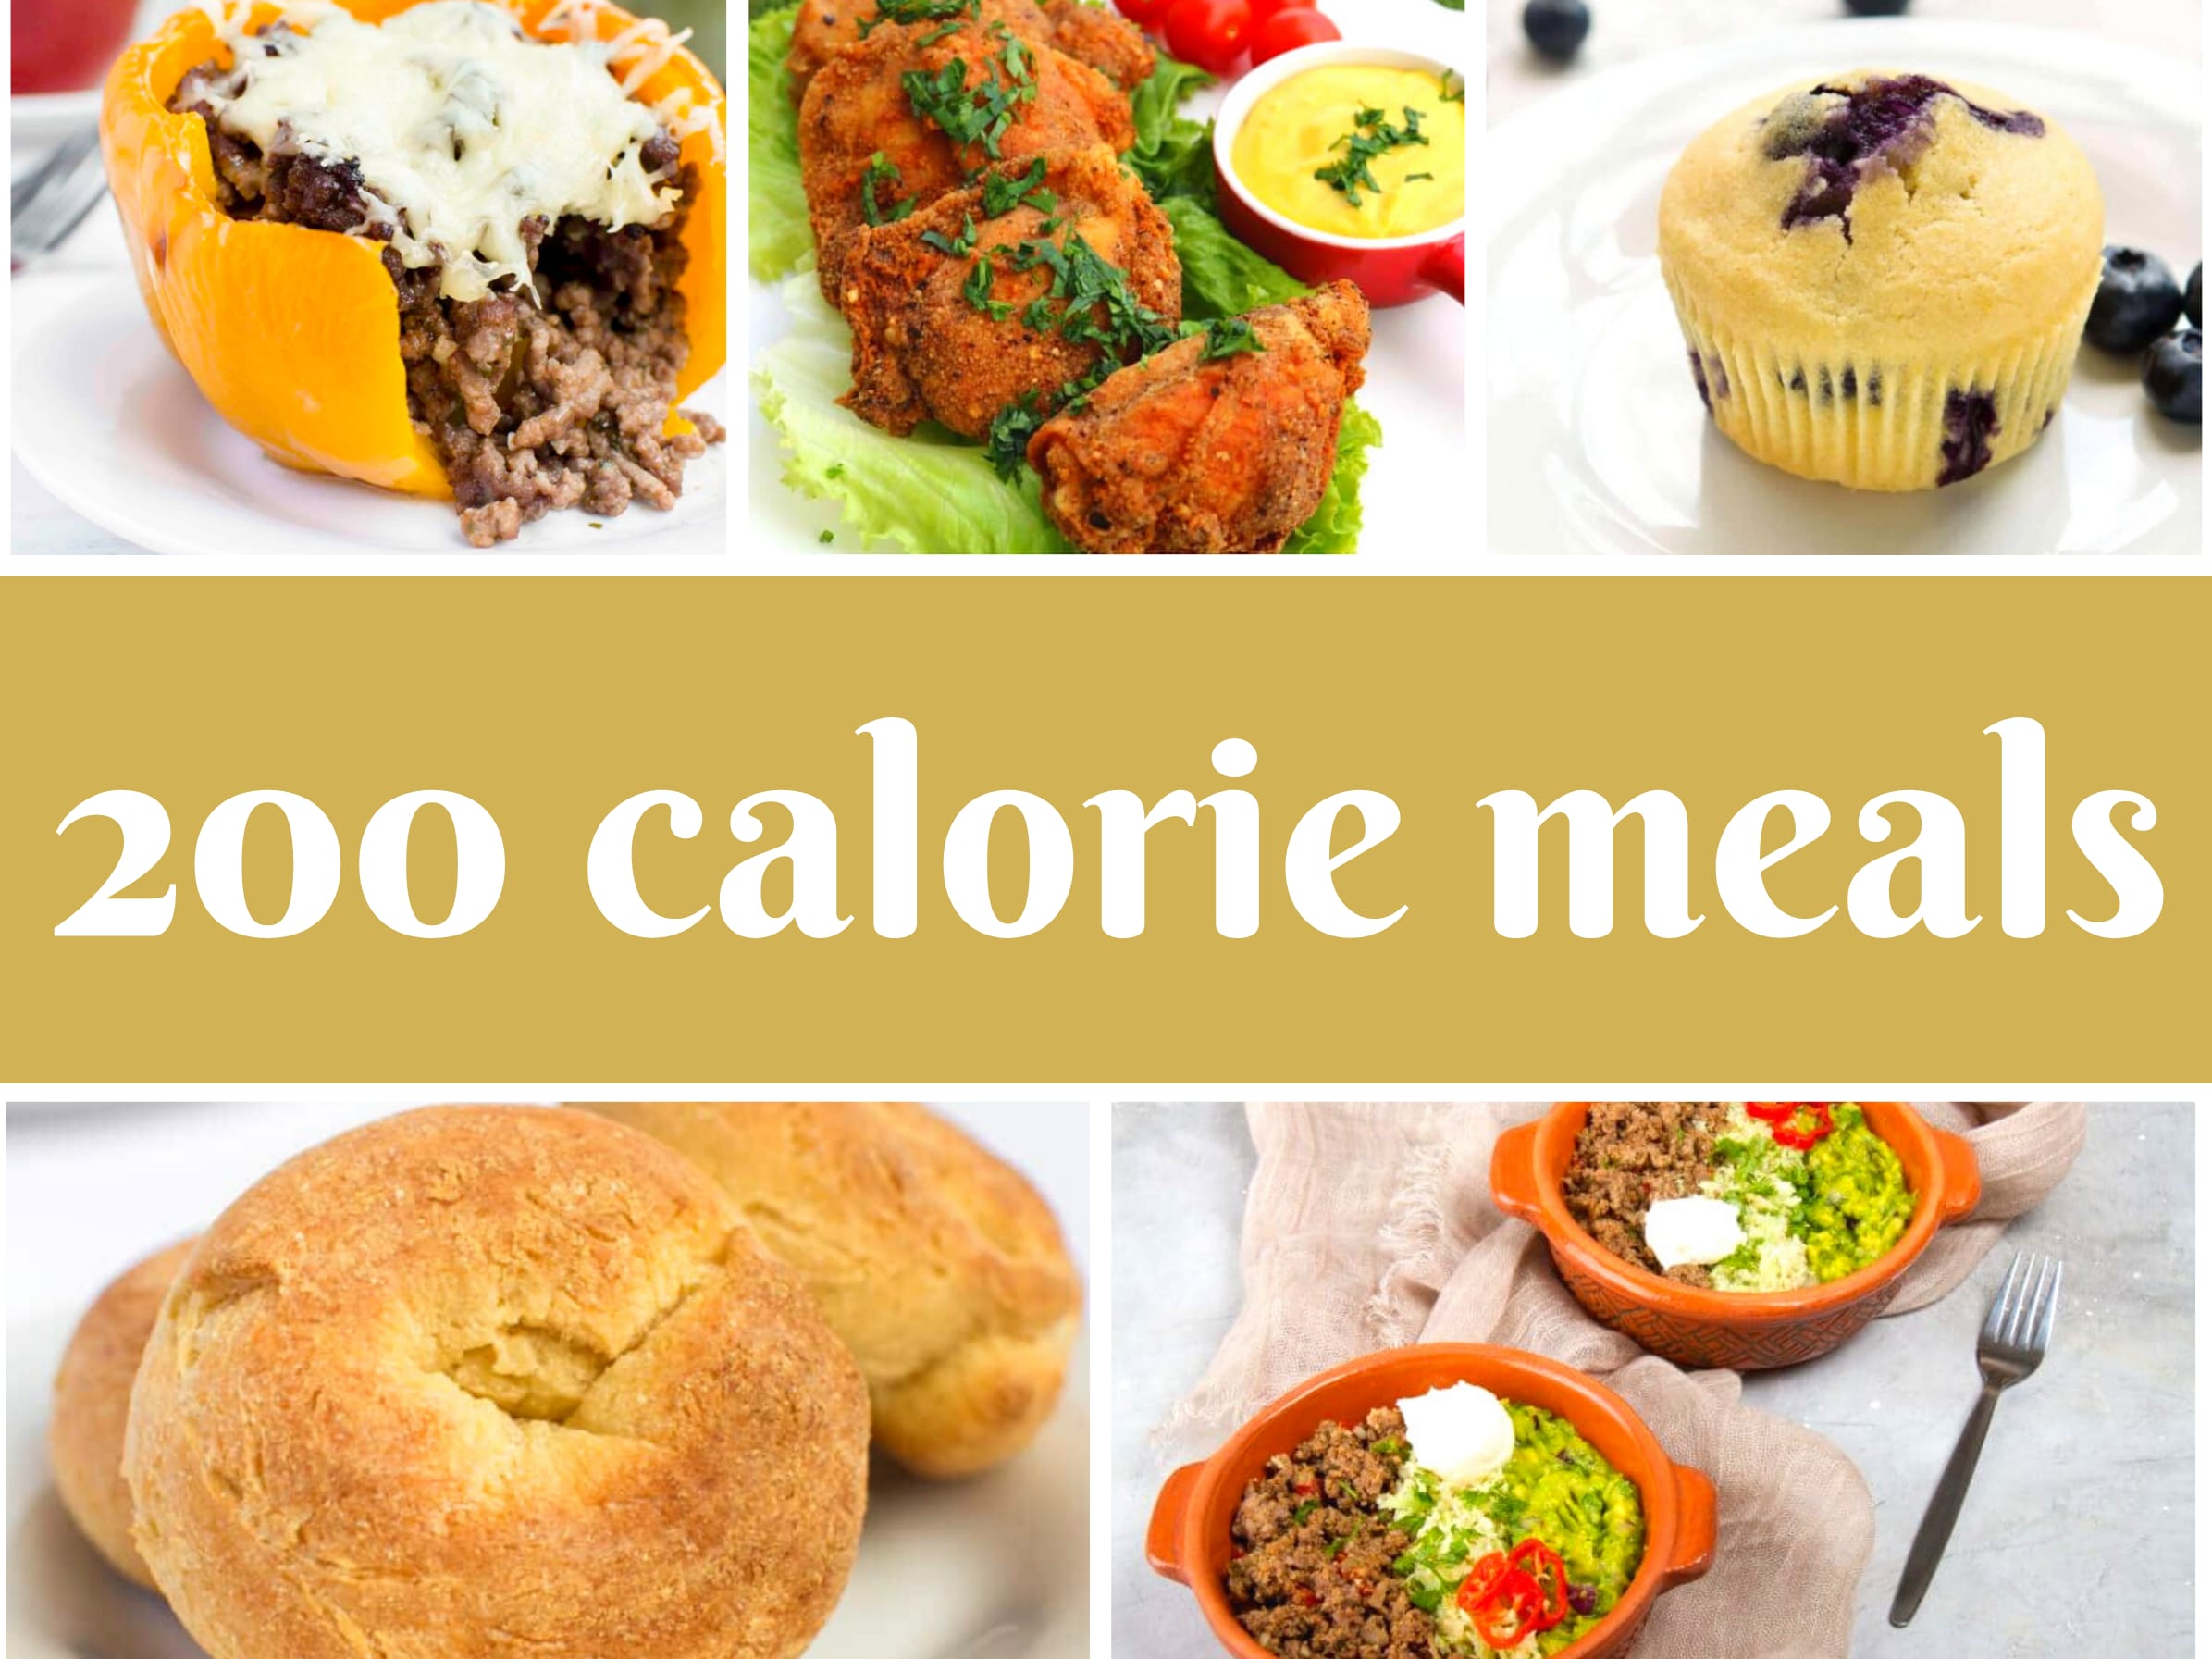 17 Skinny 200 Calorie Meals That Fill You Up - Oh So Foodie